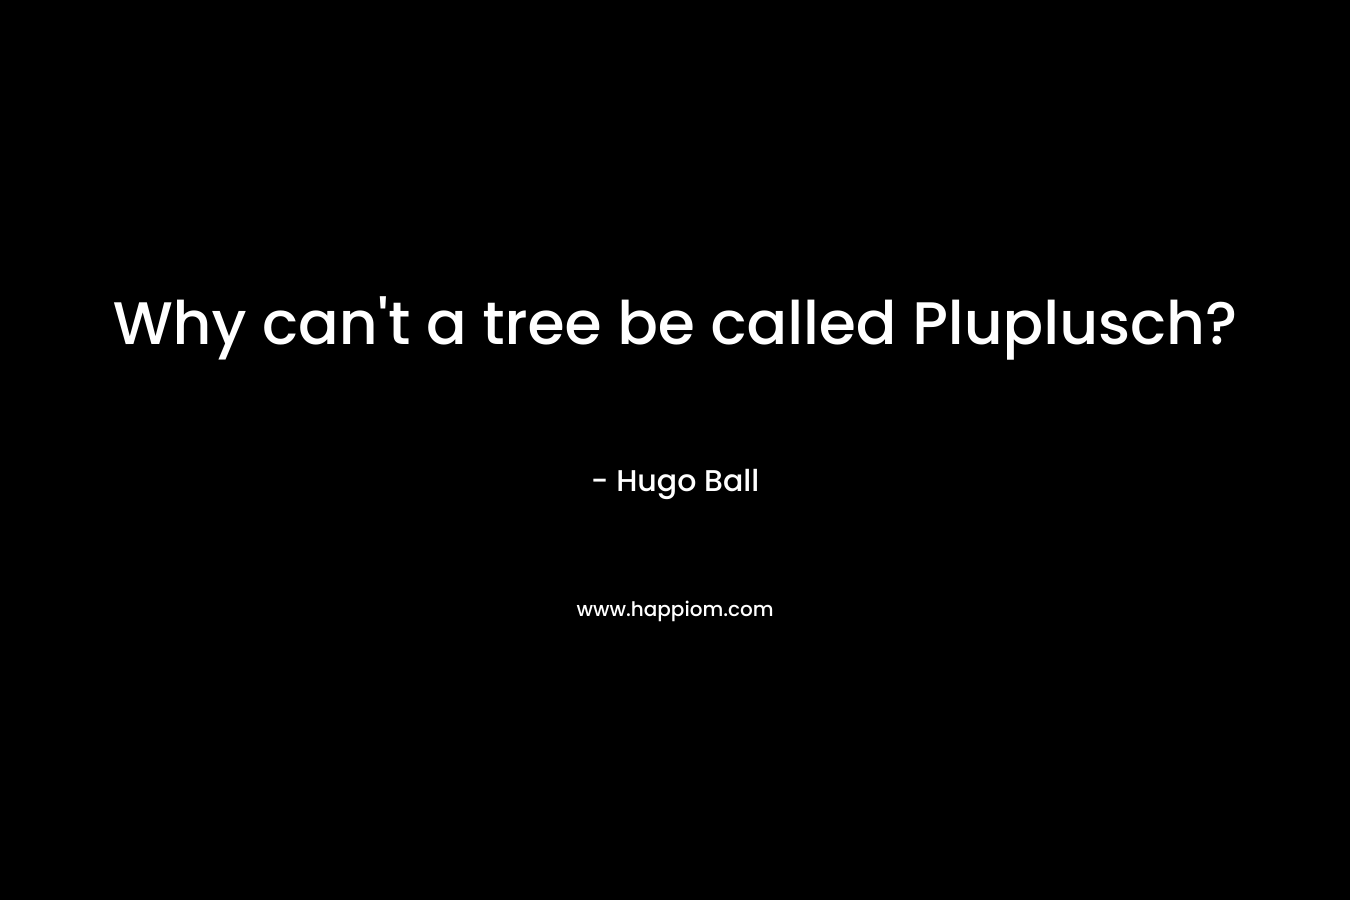 Why can’t a tree be called Pluplusch? – Hugo Ball